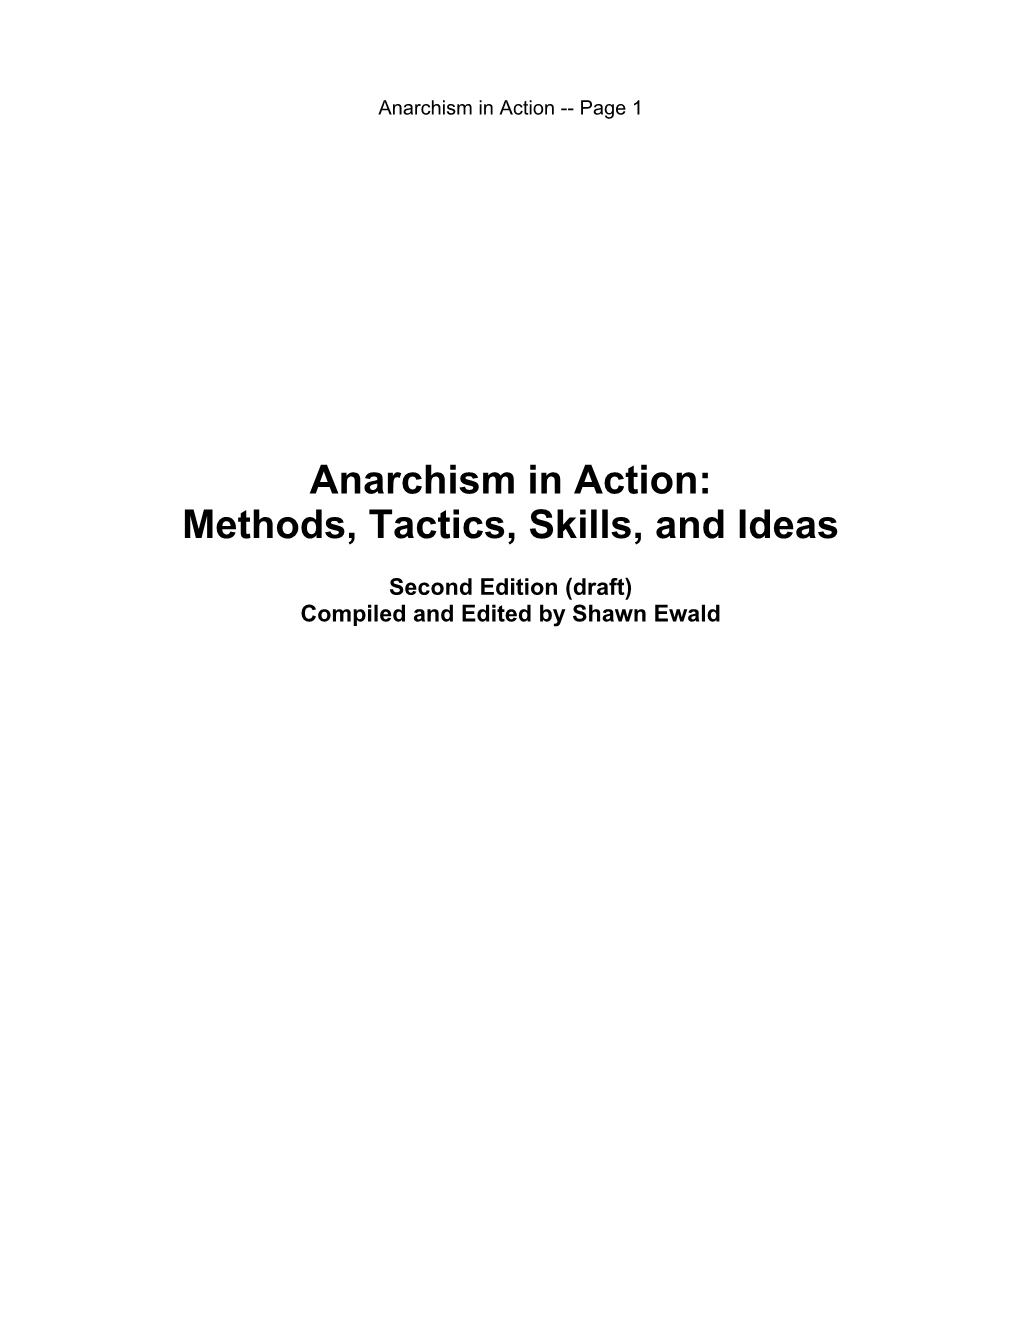 Anarchism in Action: Methods, Tactics, Skills, and Ideas